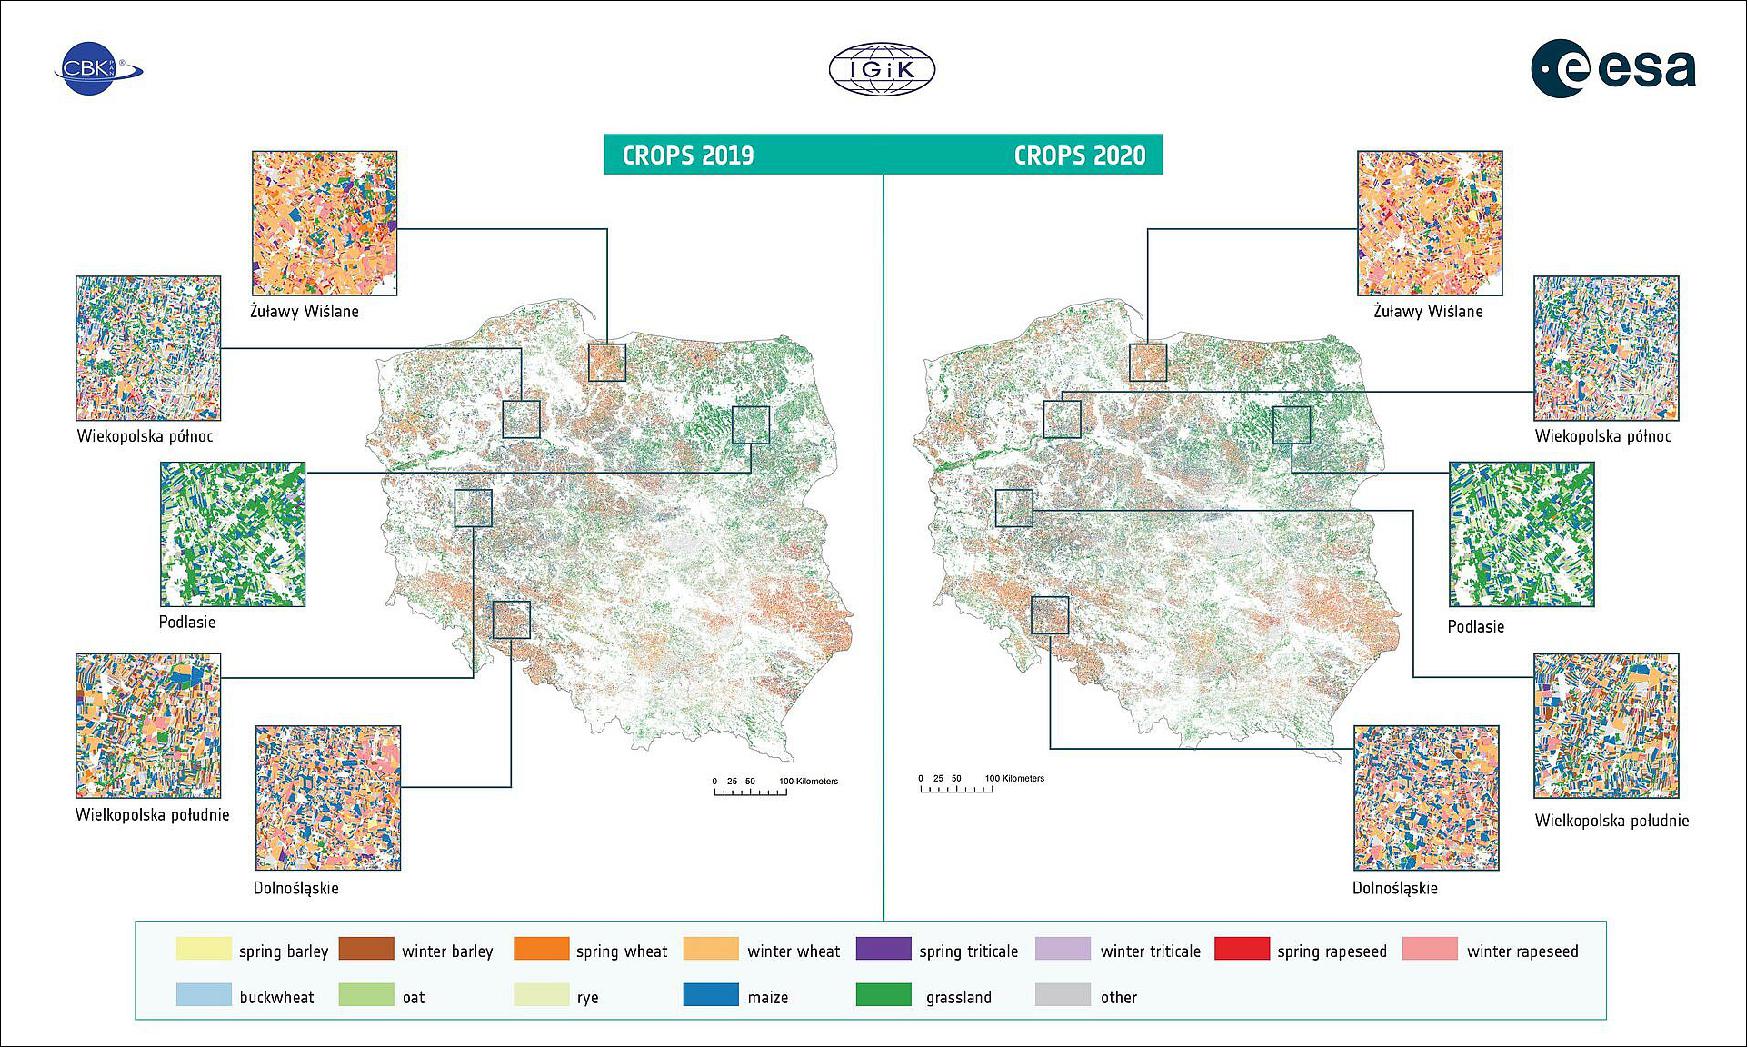 Figure 6: EOStat mapping of crop type in Poland. These two maps show the various crop types identified and mapped in the 2019 and 2020 vegetation seasons in Poland by the ESA EOStat project, which uses data from the Copernicus Sentinel-1 and Sentinel-2 satellites. Crop types explored: barley (spring and winter), wheat (spring and winter), triticale (spring and winter), rapeseed (spring and winter) buckwheat, oat, rye, maize, grassland and other. The same five regions are also identified in each map (for 2019 and 2020: Żuławy Wiślane, Wiekopolska północ, Podlasie, Wielkopolska południe and Dolnośląskie), with a closer view of crop diversification shown in the inset boxes. The map scale is shown to the bottom center (in kilometers), image credit: EOStat (ESA/IGiK/CBK PAN)